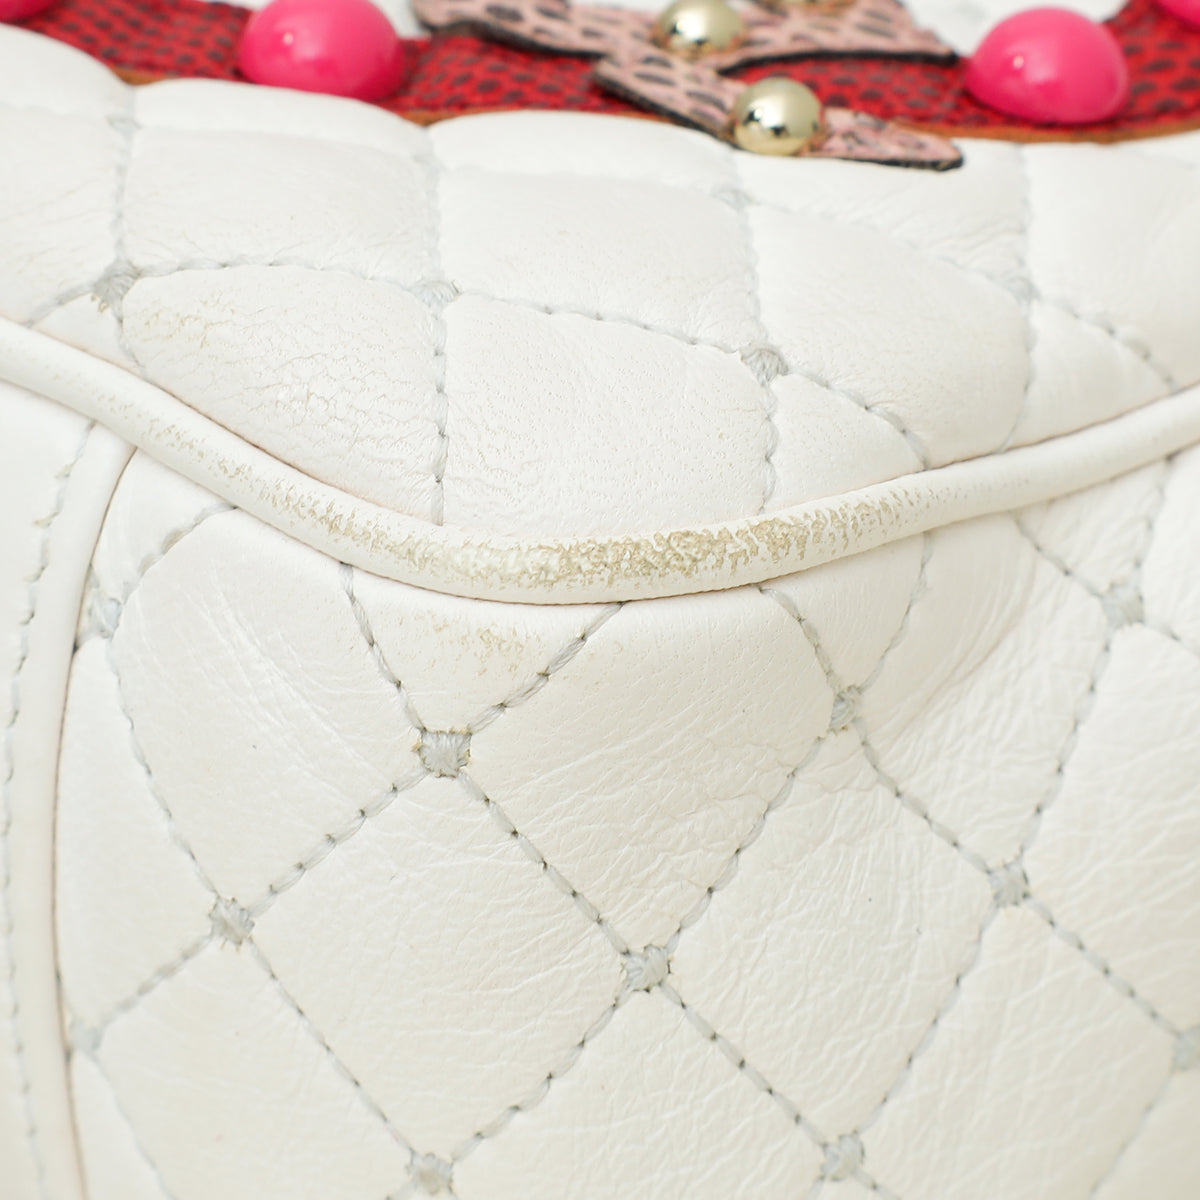 Dolce & Gabbana White Multicolor "Dolce" Studded Lucia Bag